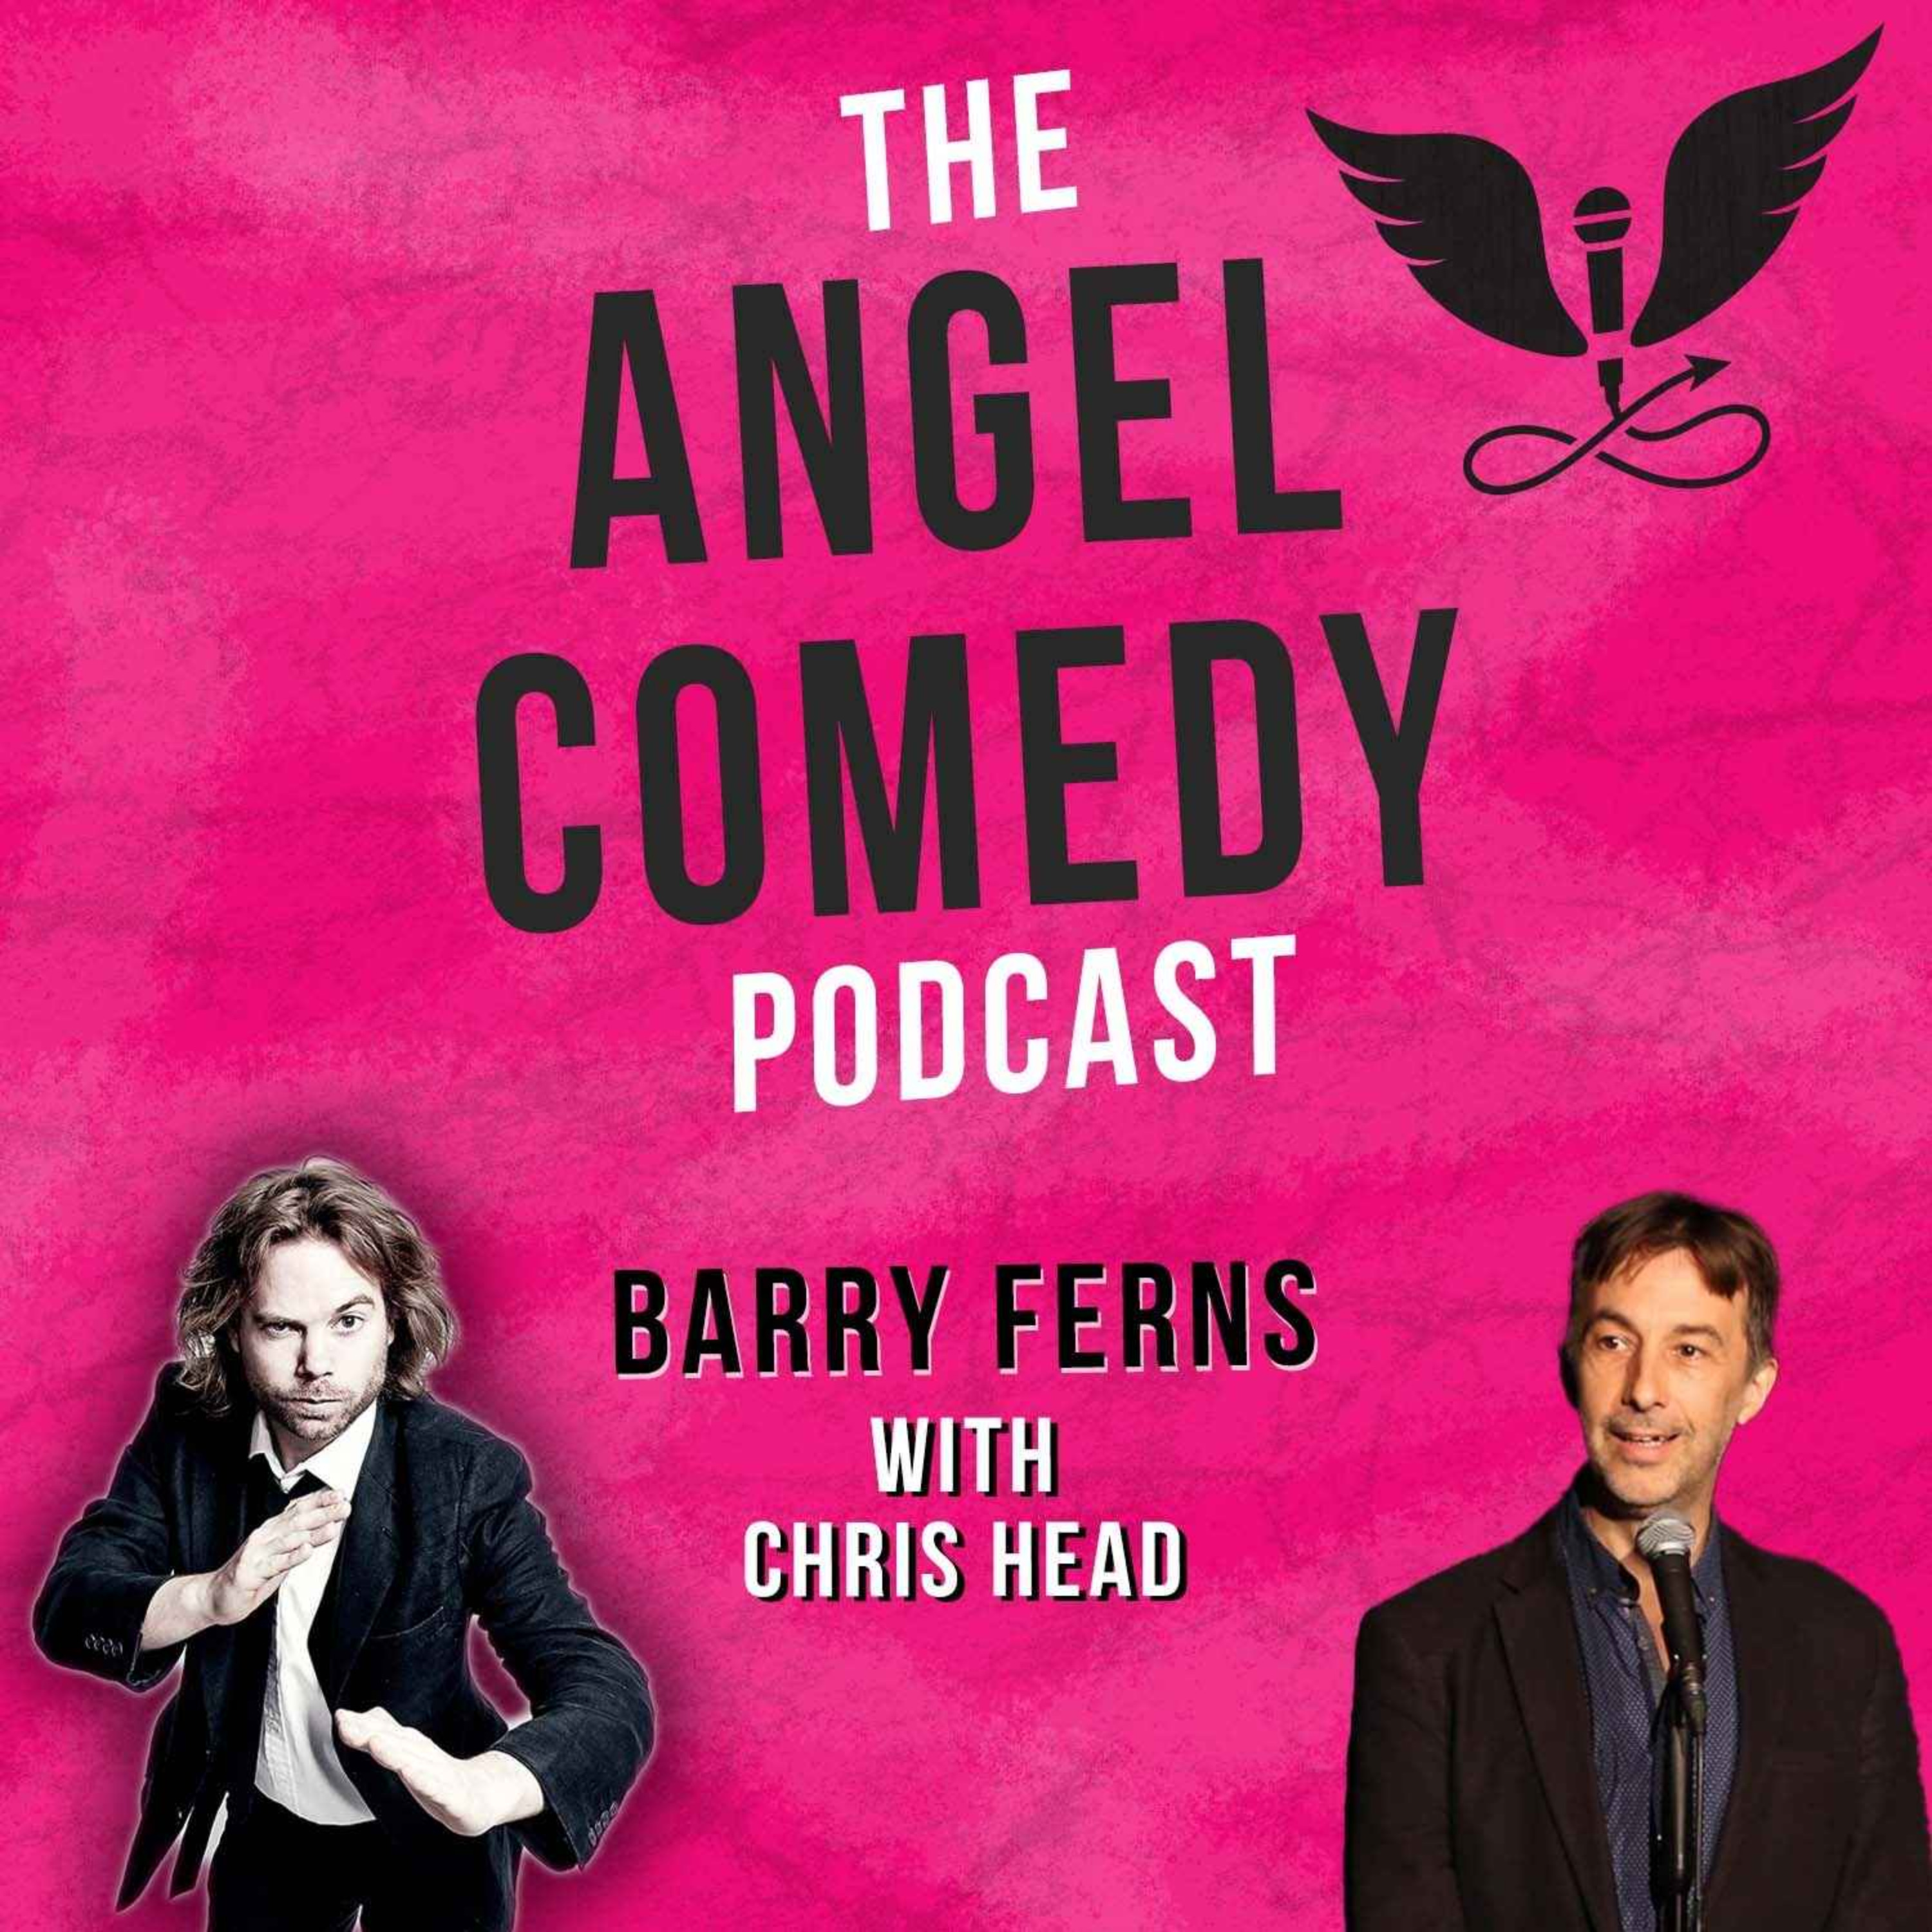 Podcast: The Angel Comedy Podcast with Chris Head - Angel Comedy